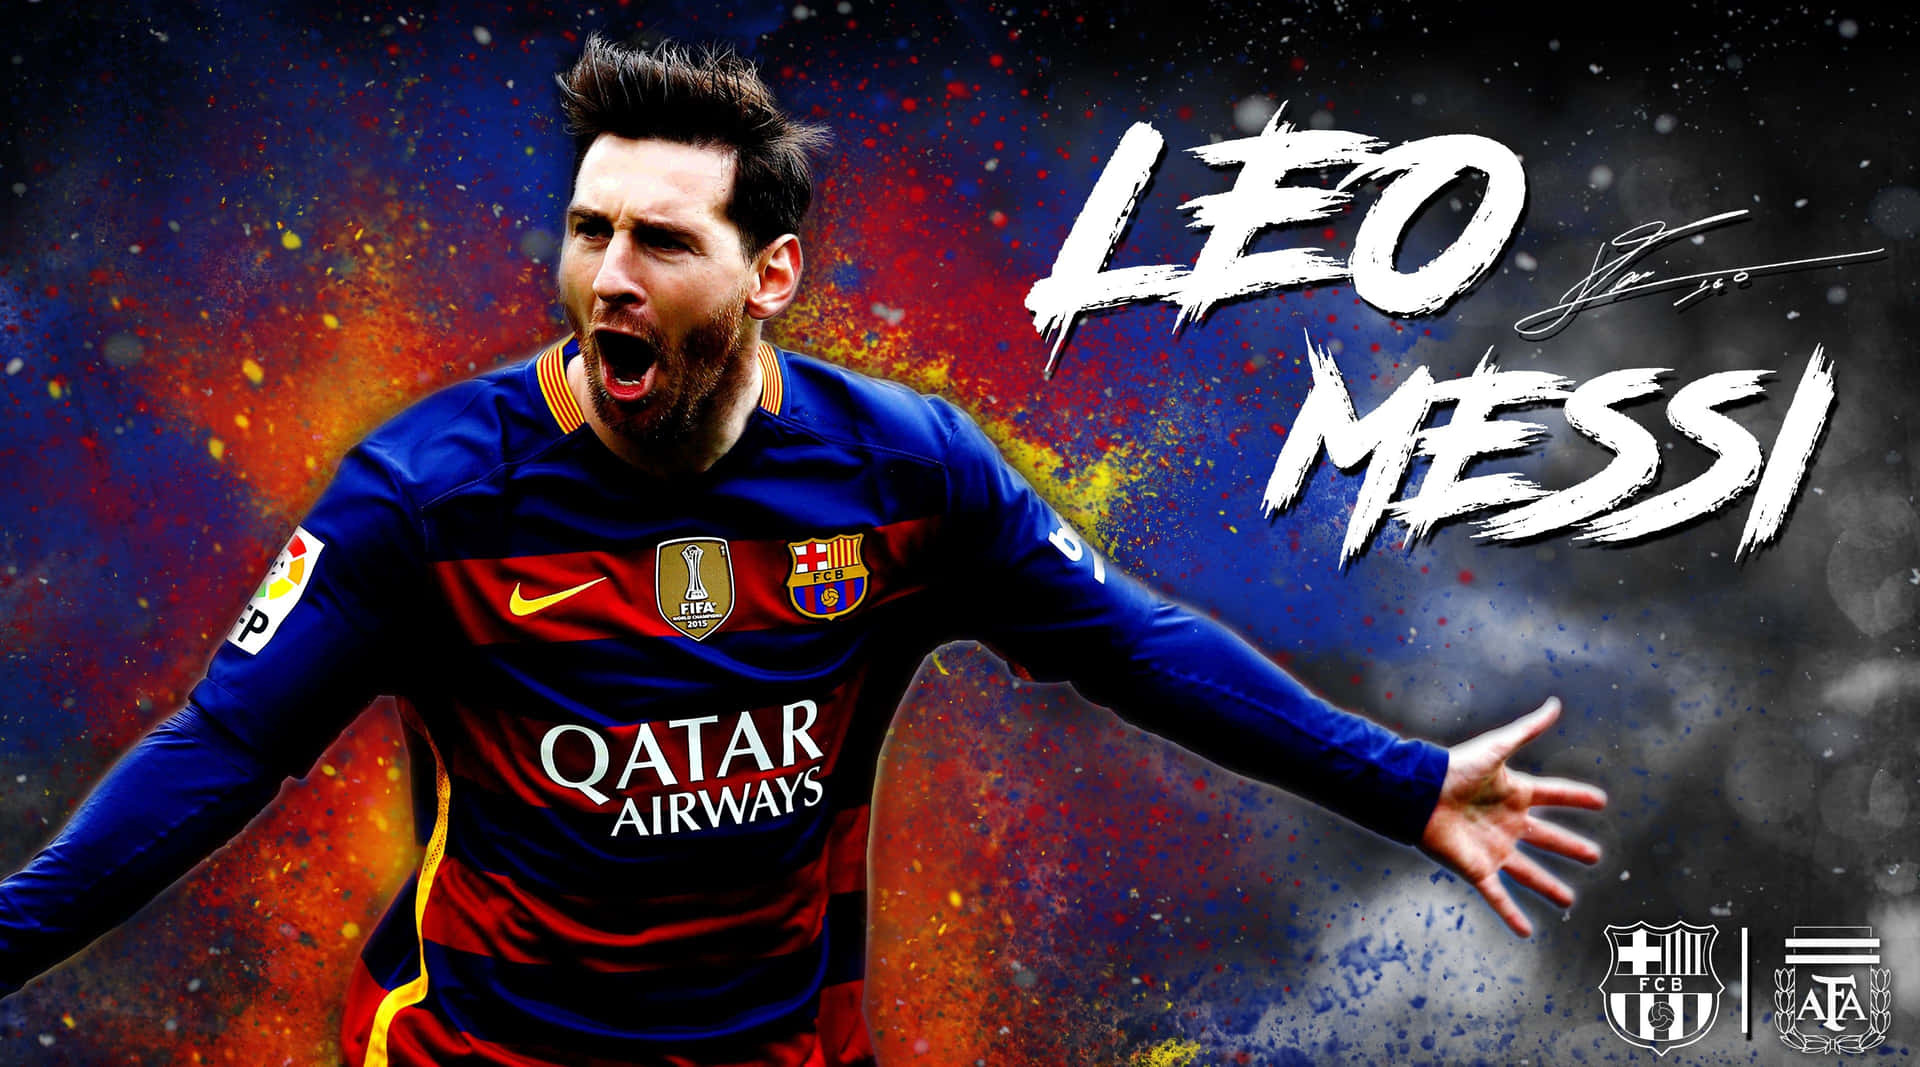 "Capturing moments with the one and only, Lionel Messi!"